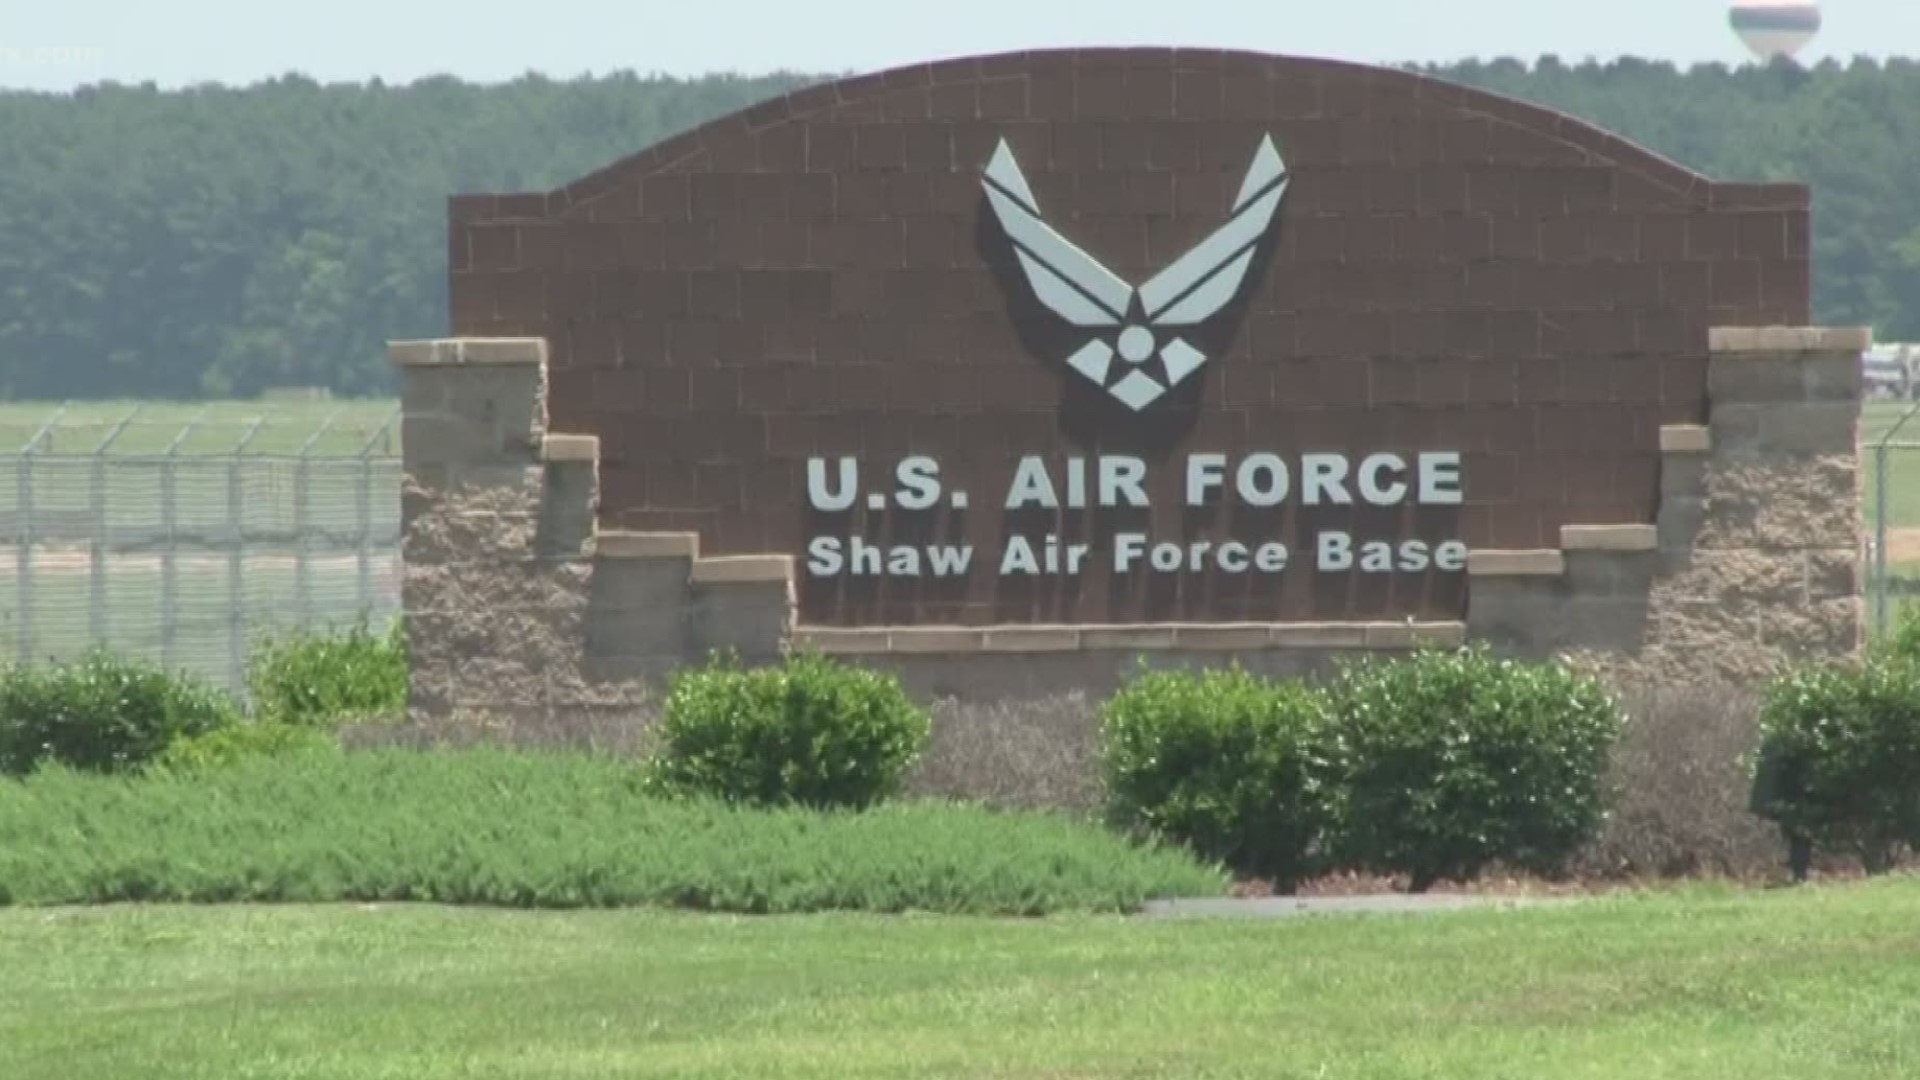 Senior Airman Aaron Hall, assigned to the 20th Component Maintenance Squadron, passed away "from health complications" at 8:47 a.m. on Saturday at Prisma Richland Hospital in Columbia, according to officials at Shaw Air Force Base.